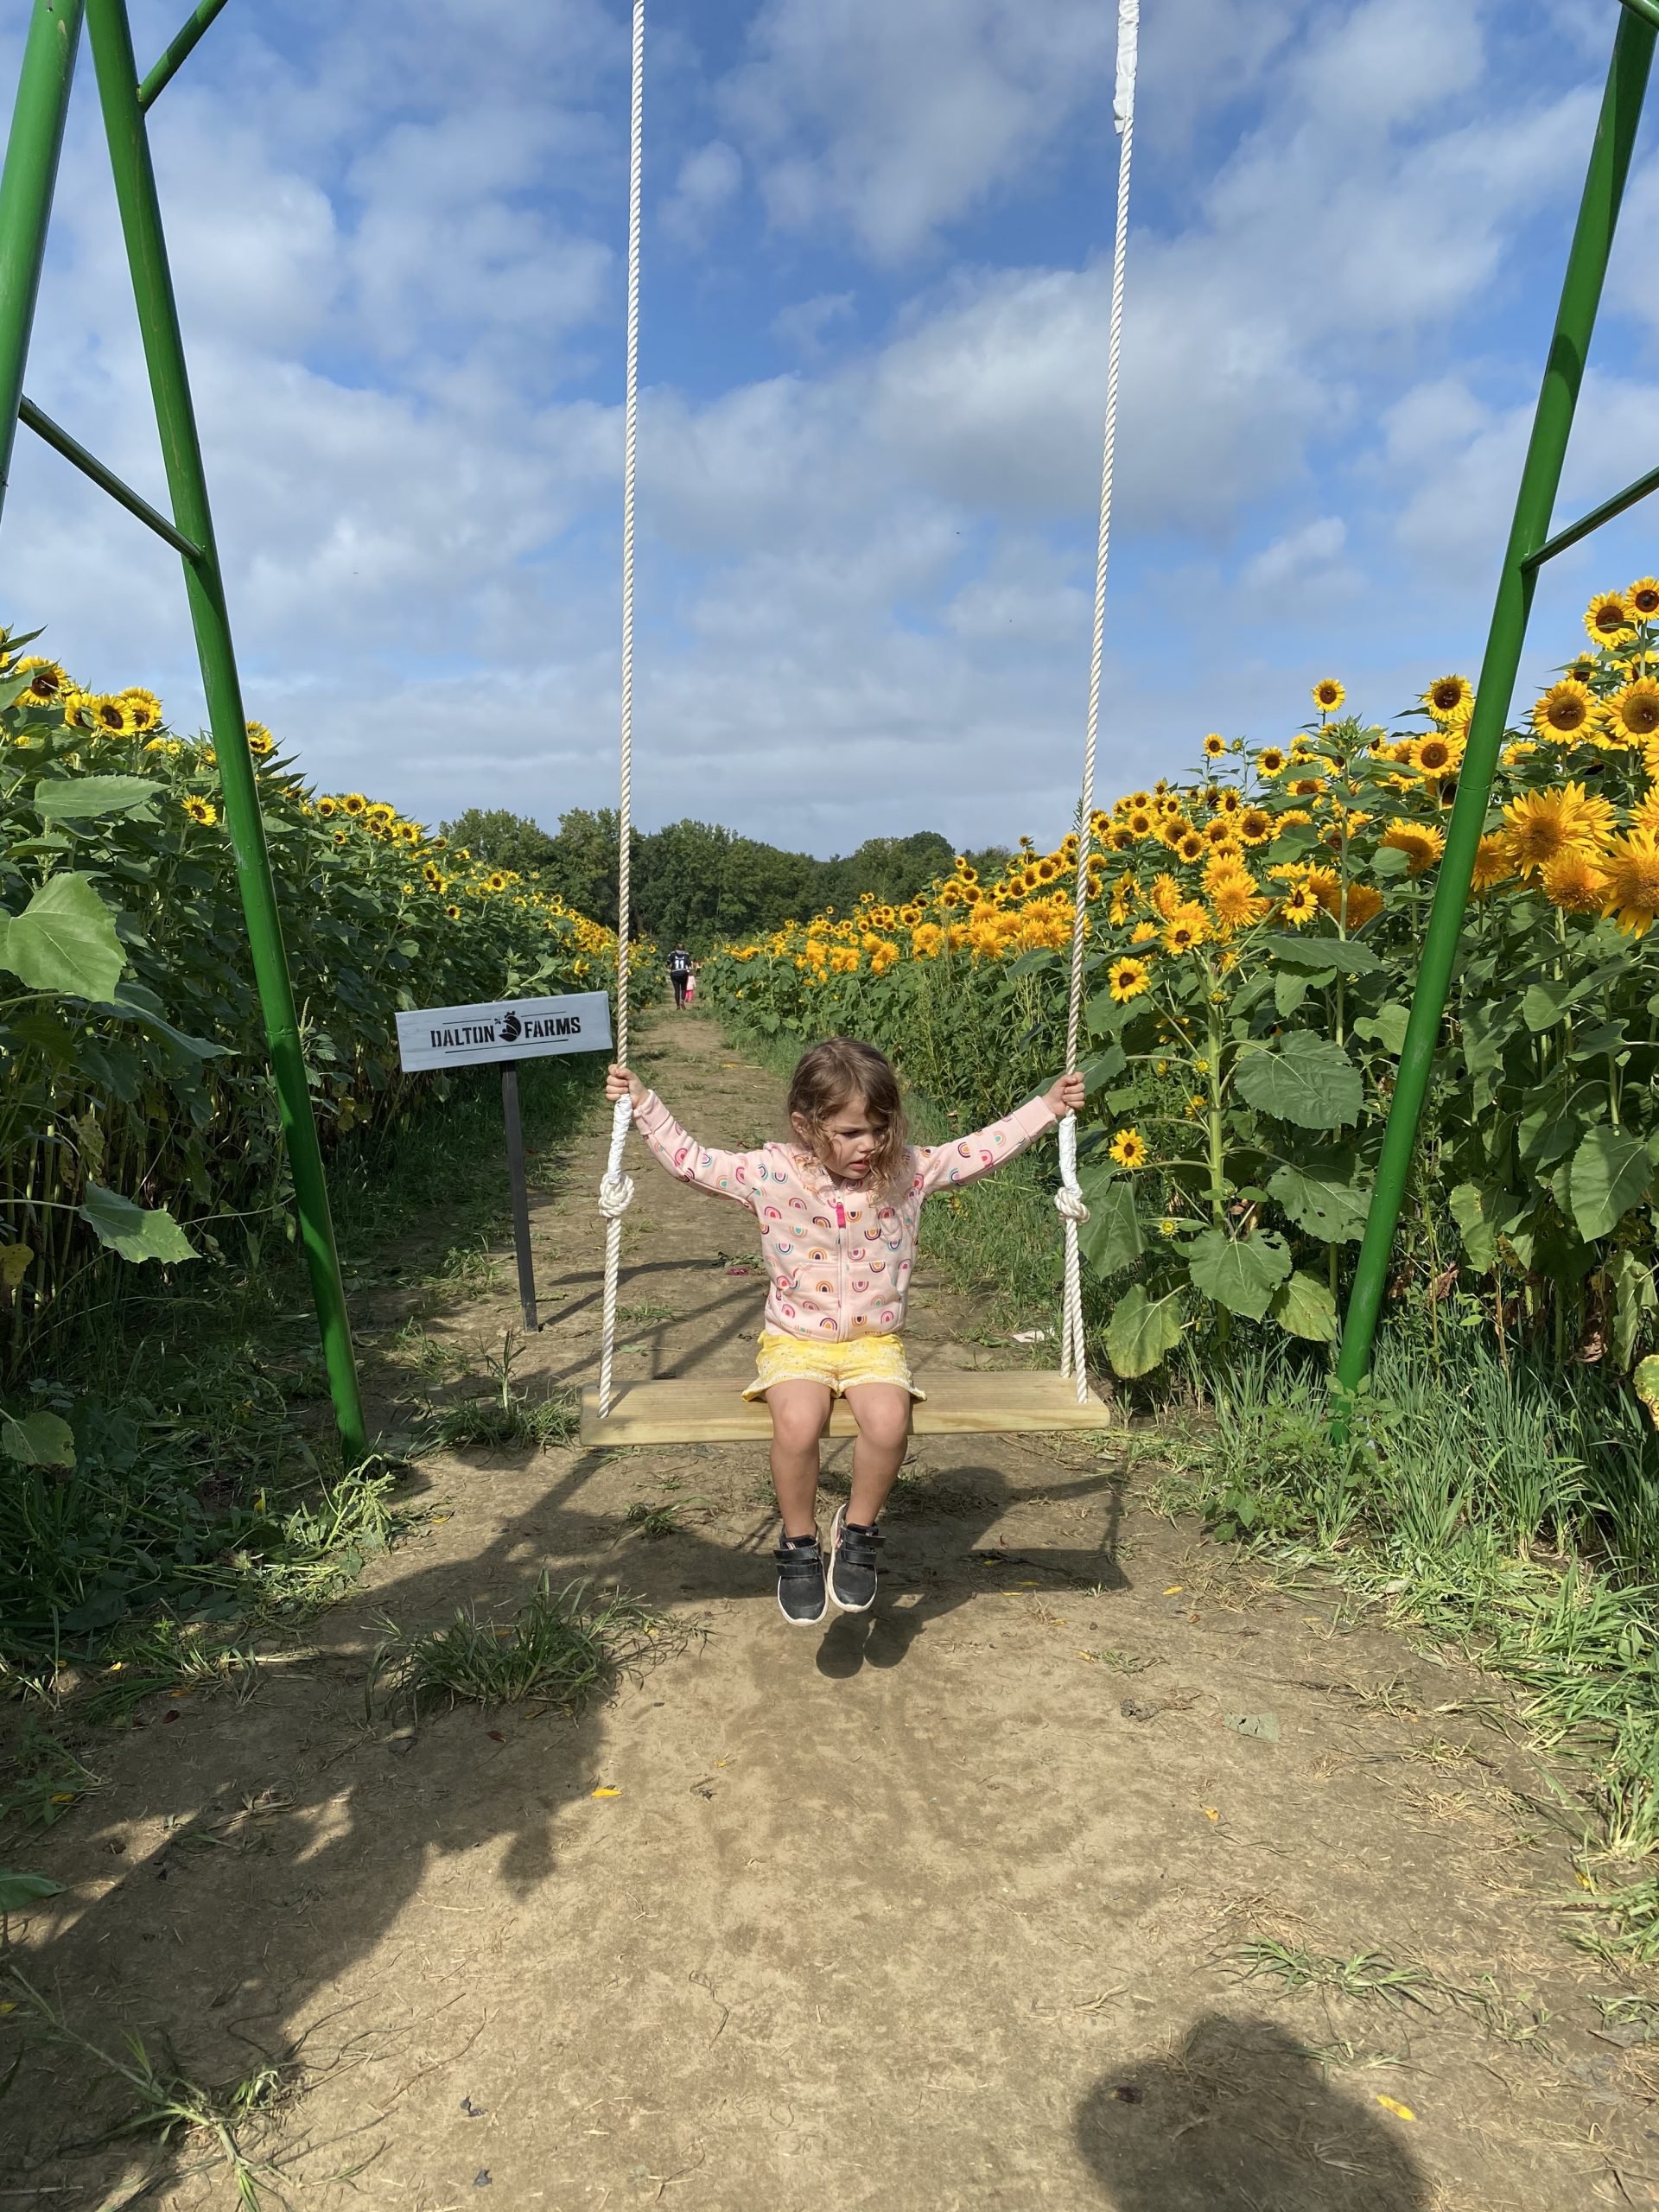 Lifestyle Blogger Chocolate & Lace shares her trip to Sunflower Fields near Philadelphia.